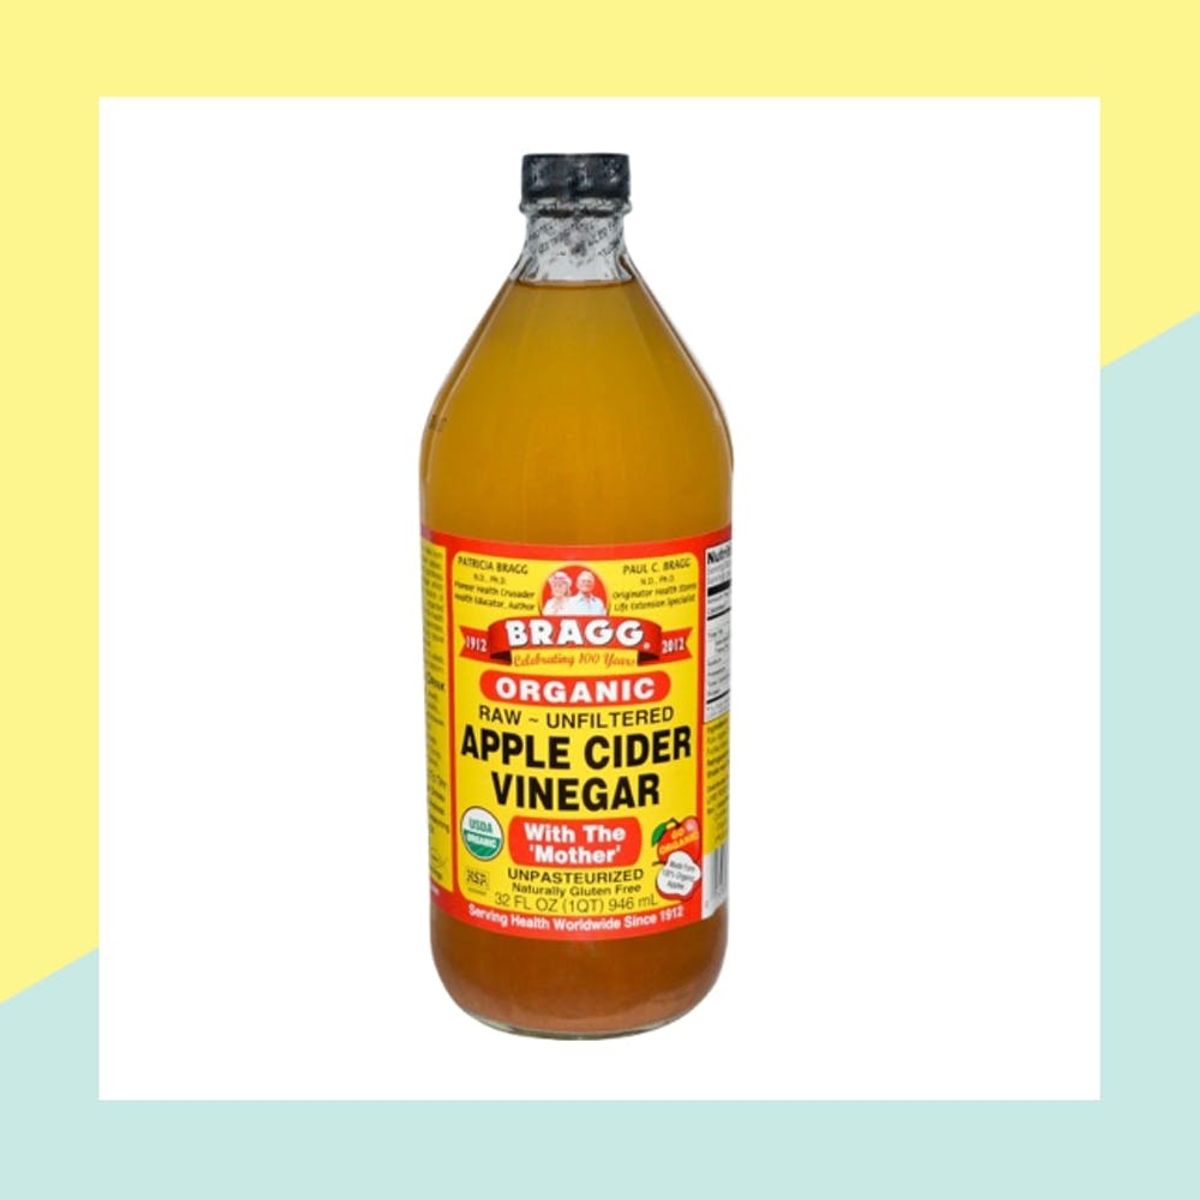 Apple Cider Vinegar Isn’t the Miracle Cure-All You Think It Is